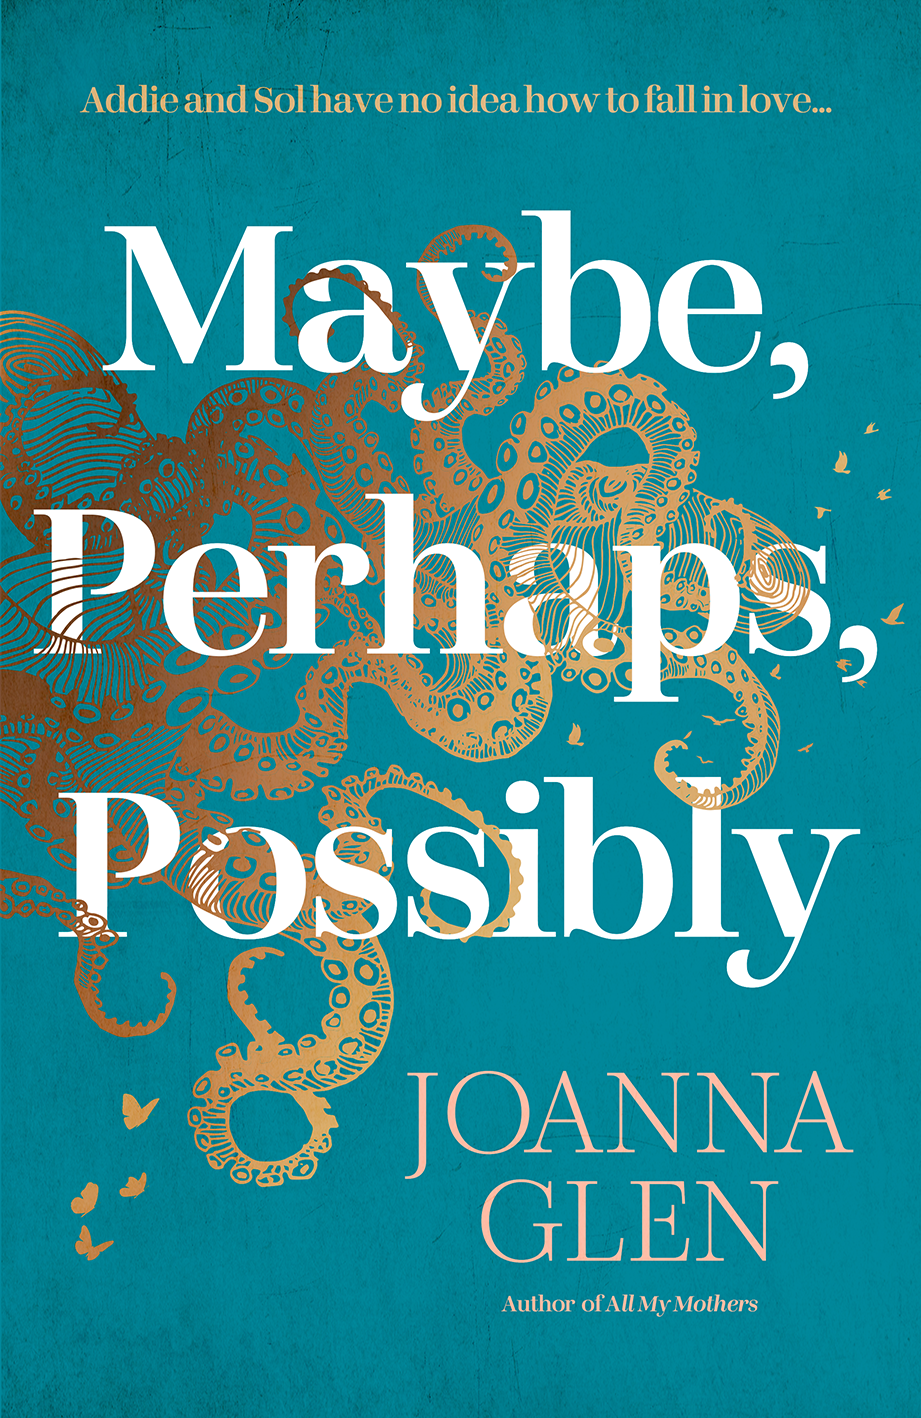 Image of Maybe, Perhaps, Possibly book cover